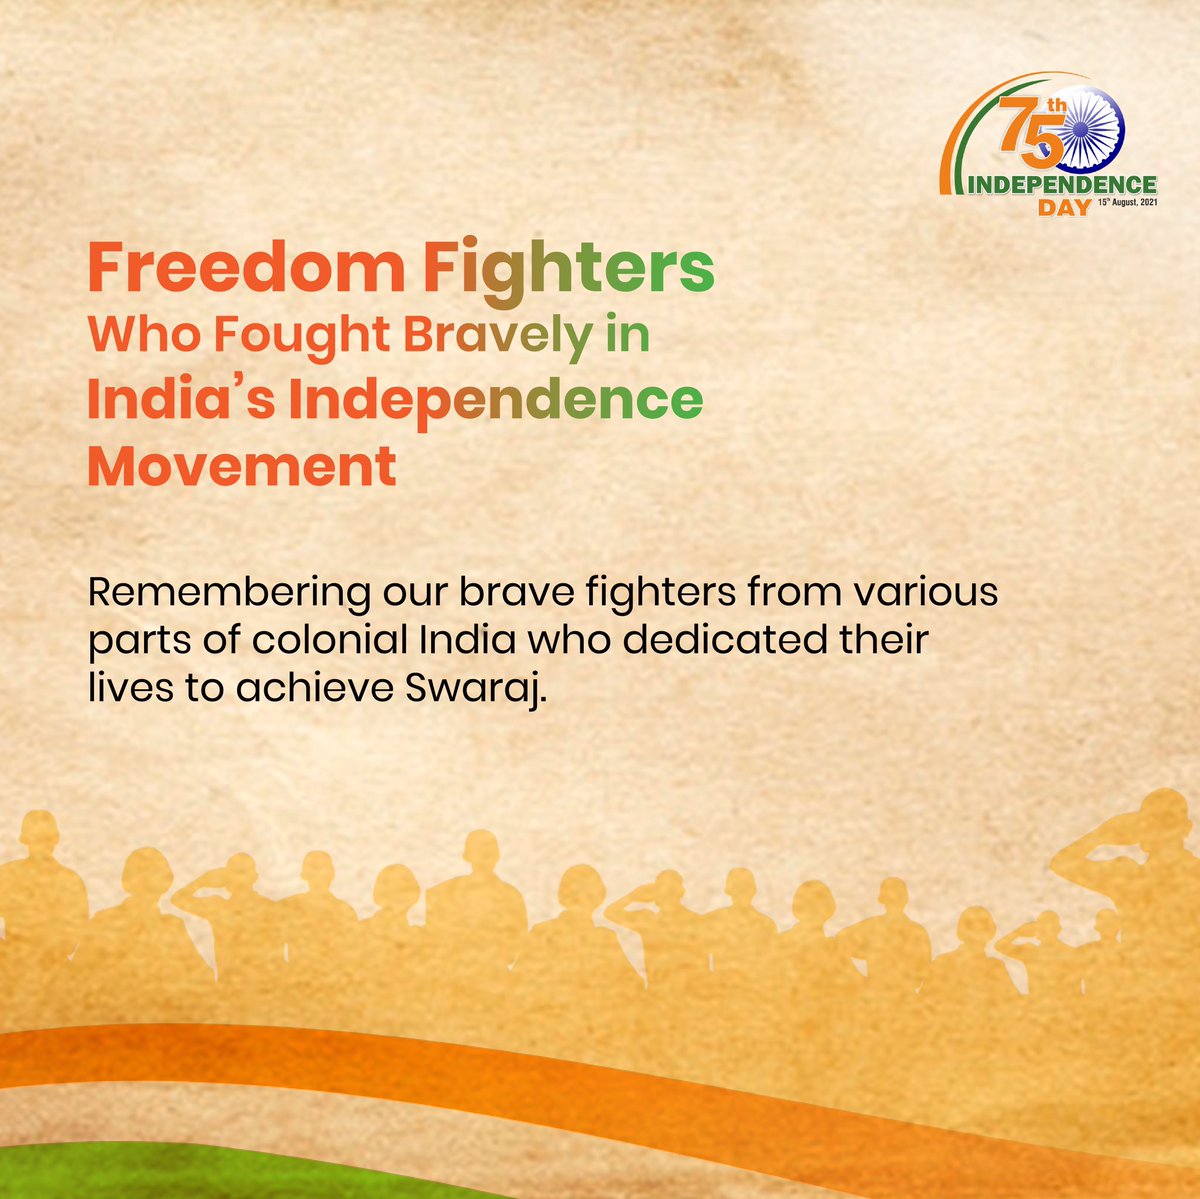 Indian Independence Day Celebrations 21 From Kashmir To Kanyakumari Assam To Gujarat Thousands Of Men And Women Fought Together To Attain Independence Indianidc21 India Indianindependenceday Freedomfighters T Co